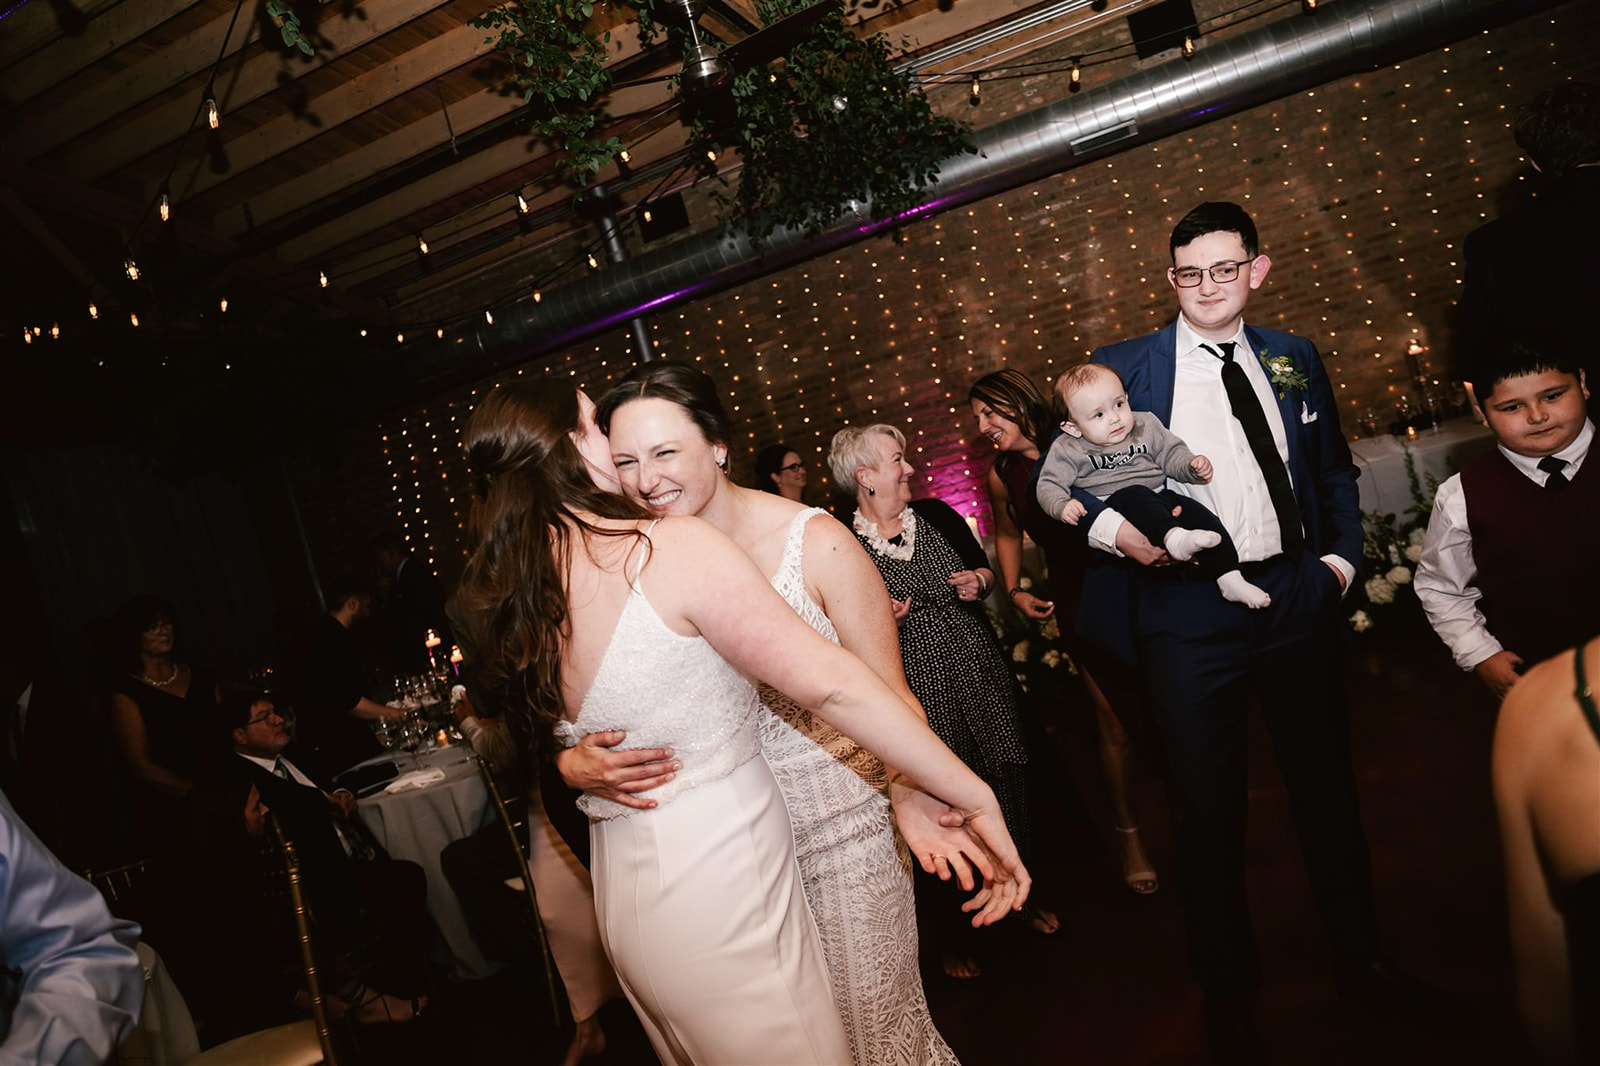 Guests joining the two brides on the dance floor, creating a lively and joyous atmosphere at Loft on Lake.